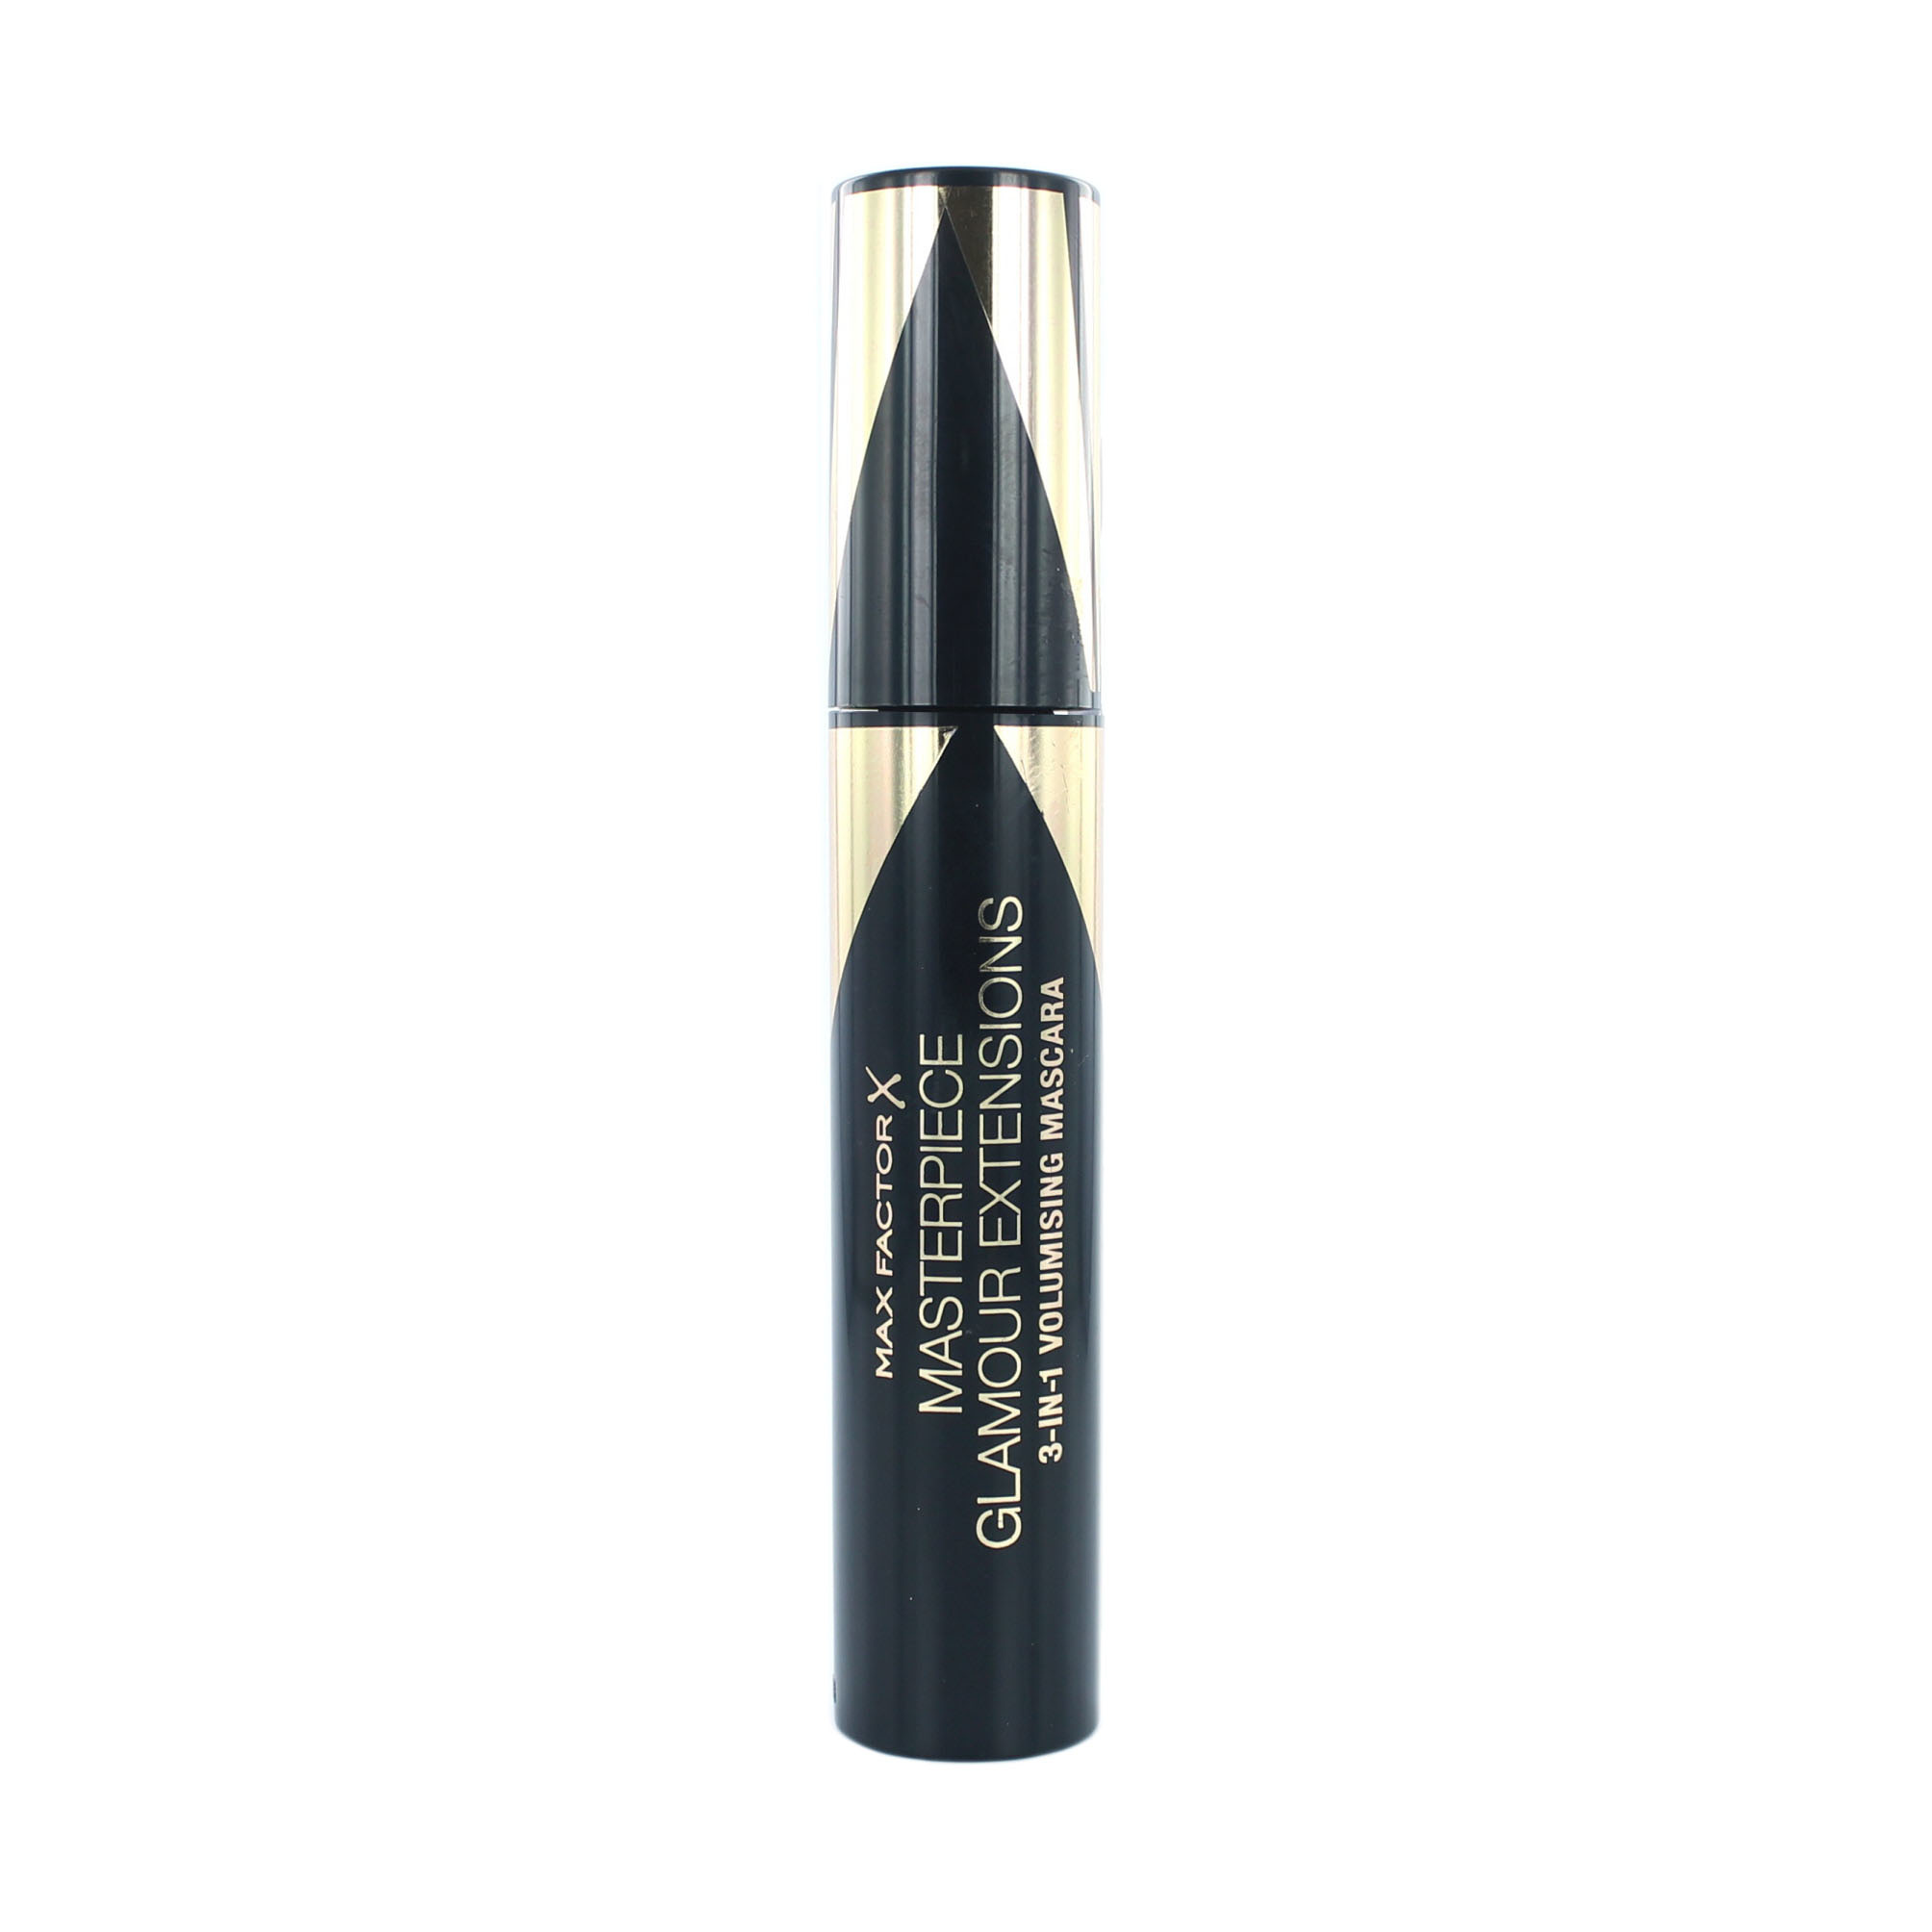 Max Factor Masterpiece Glamour Extensions Mascara - Black Brown